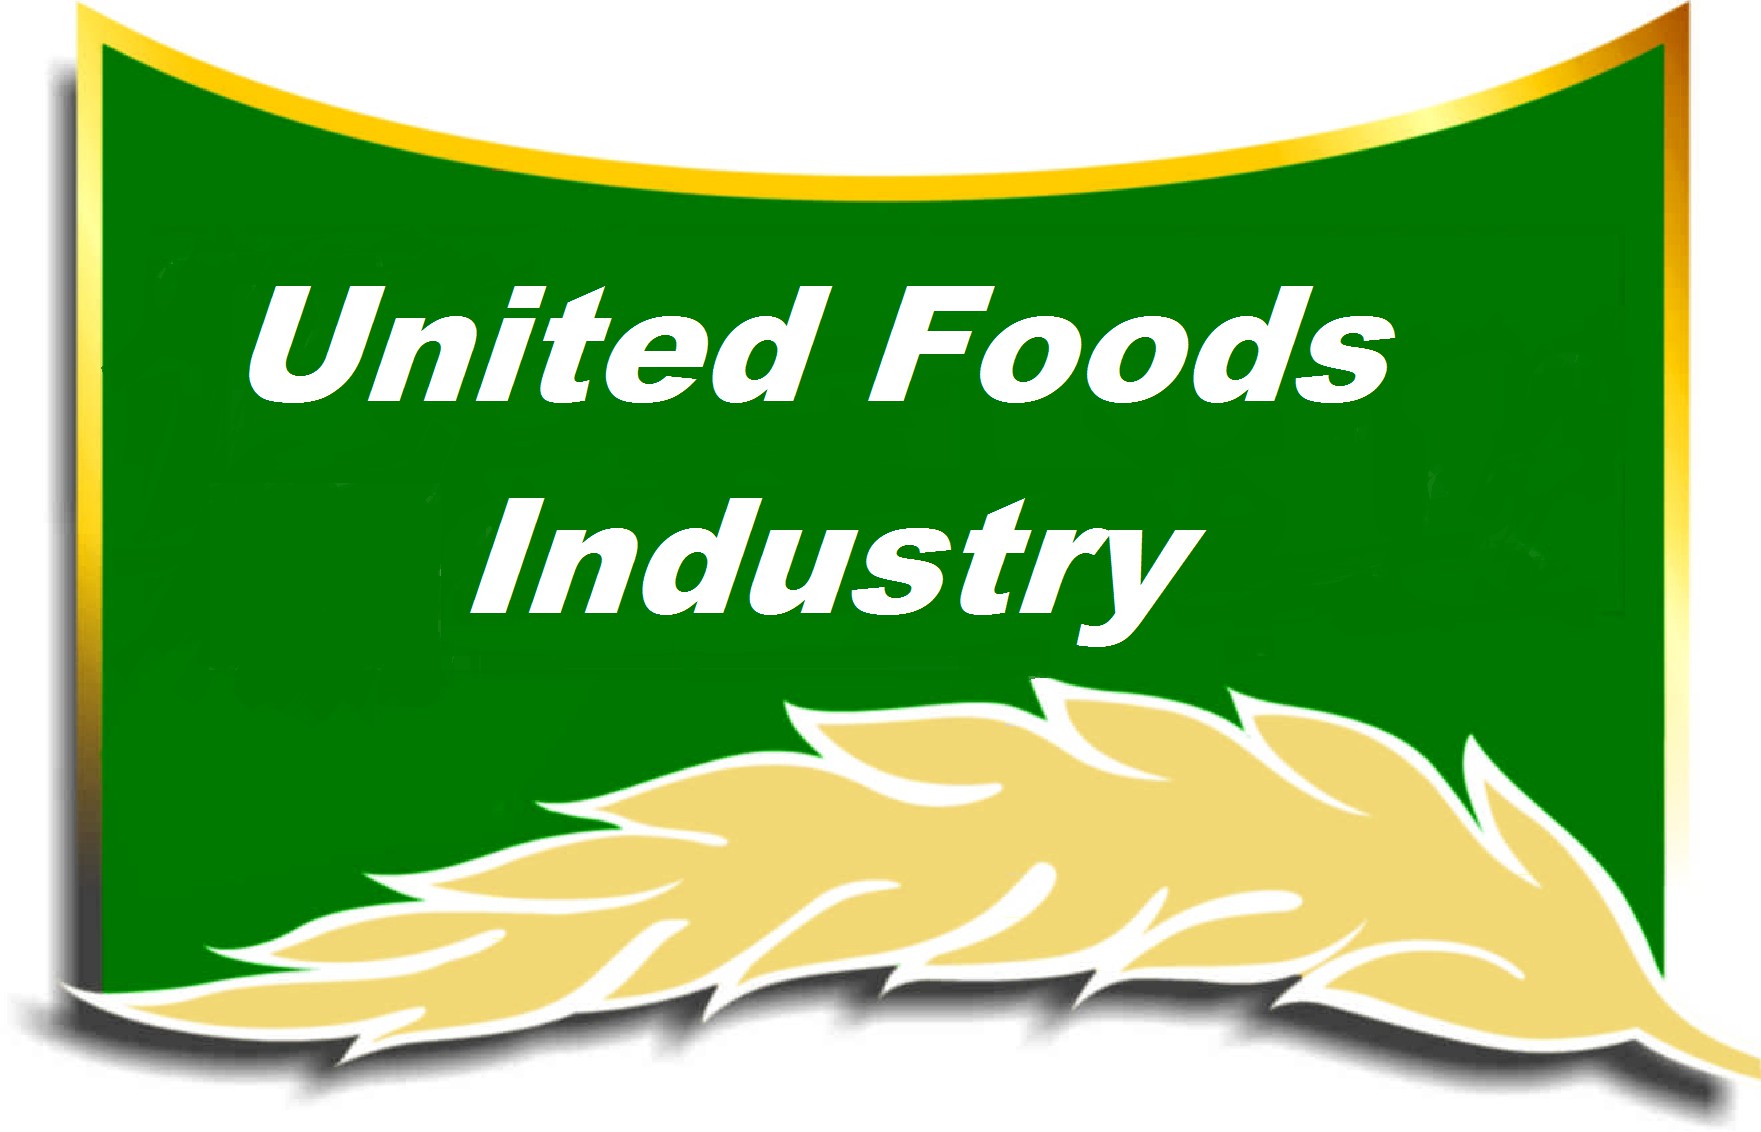 United Foods Products